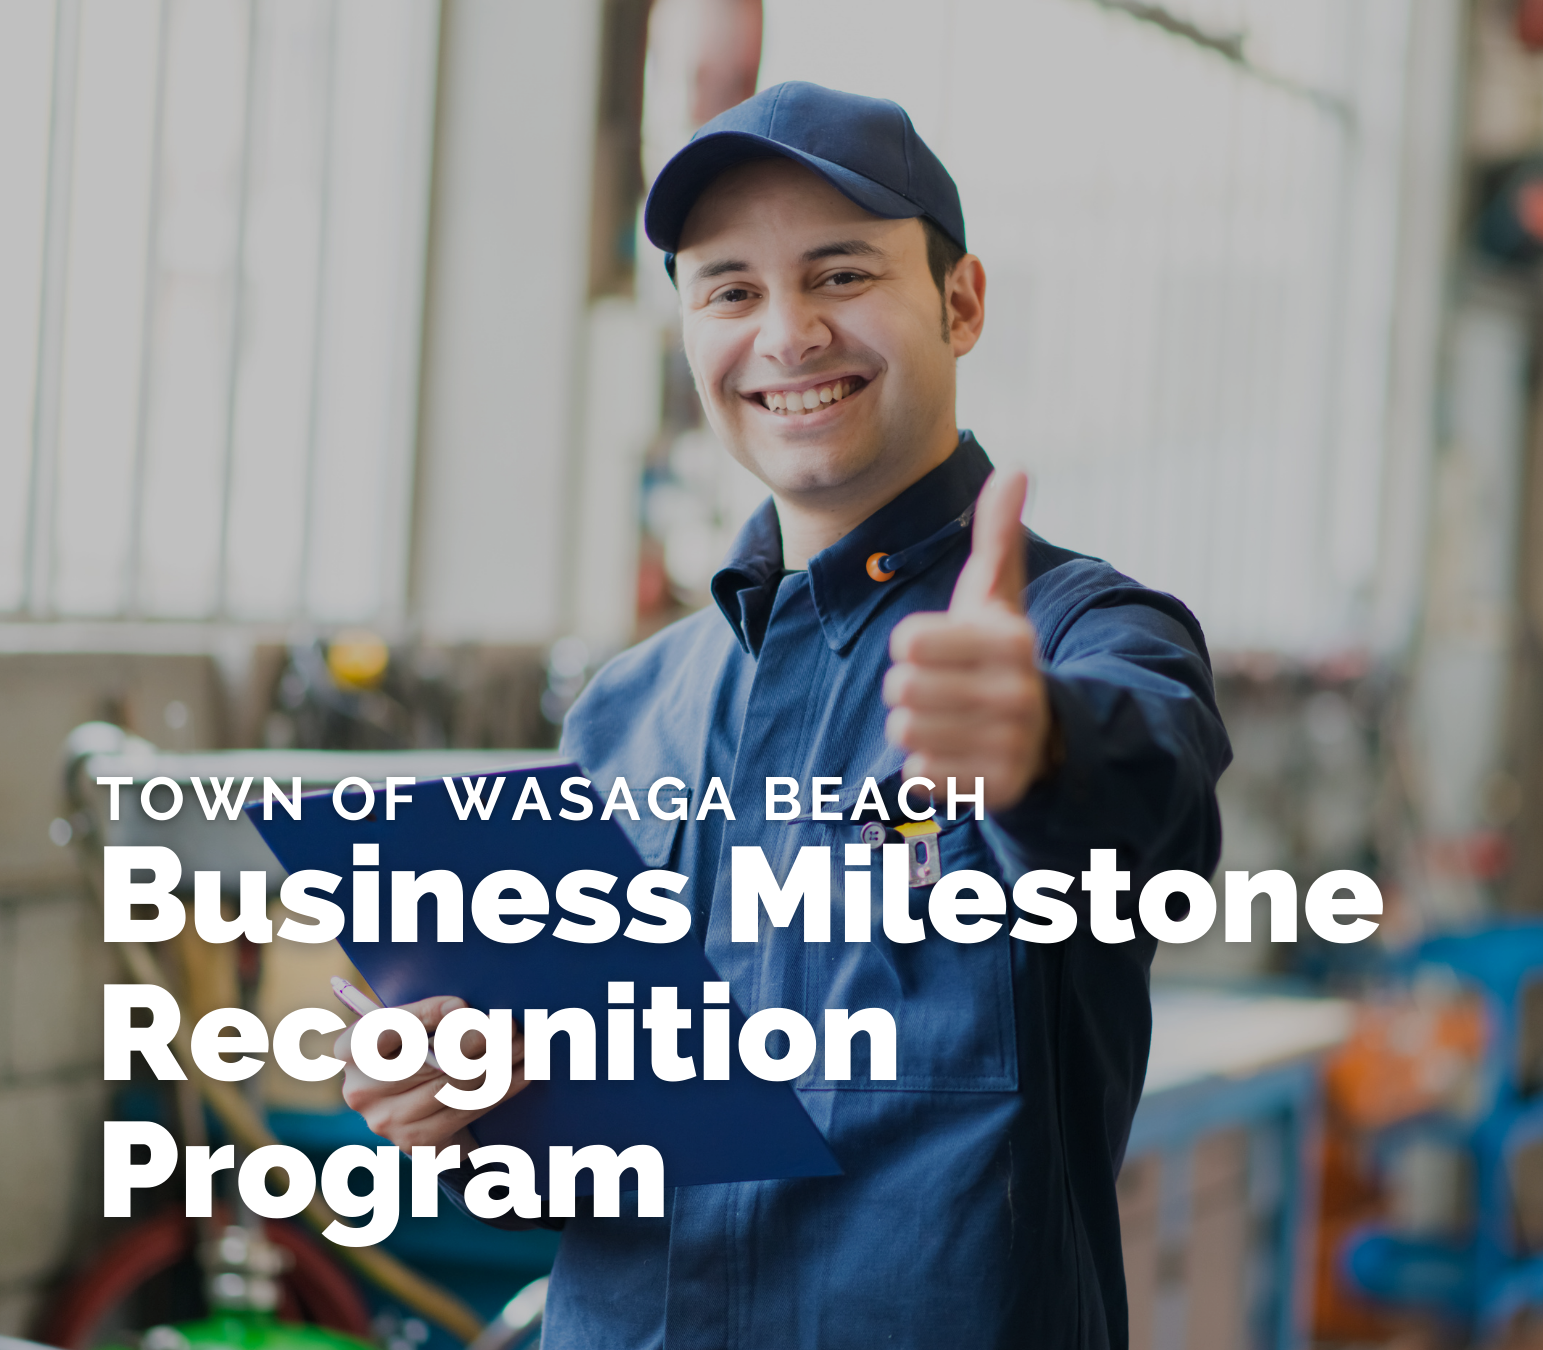 Click this to visit the Business Milestone Recognition Program Page